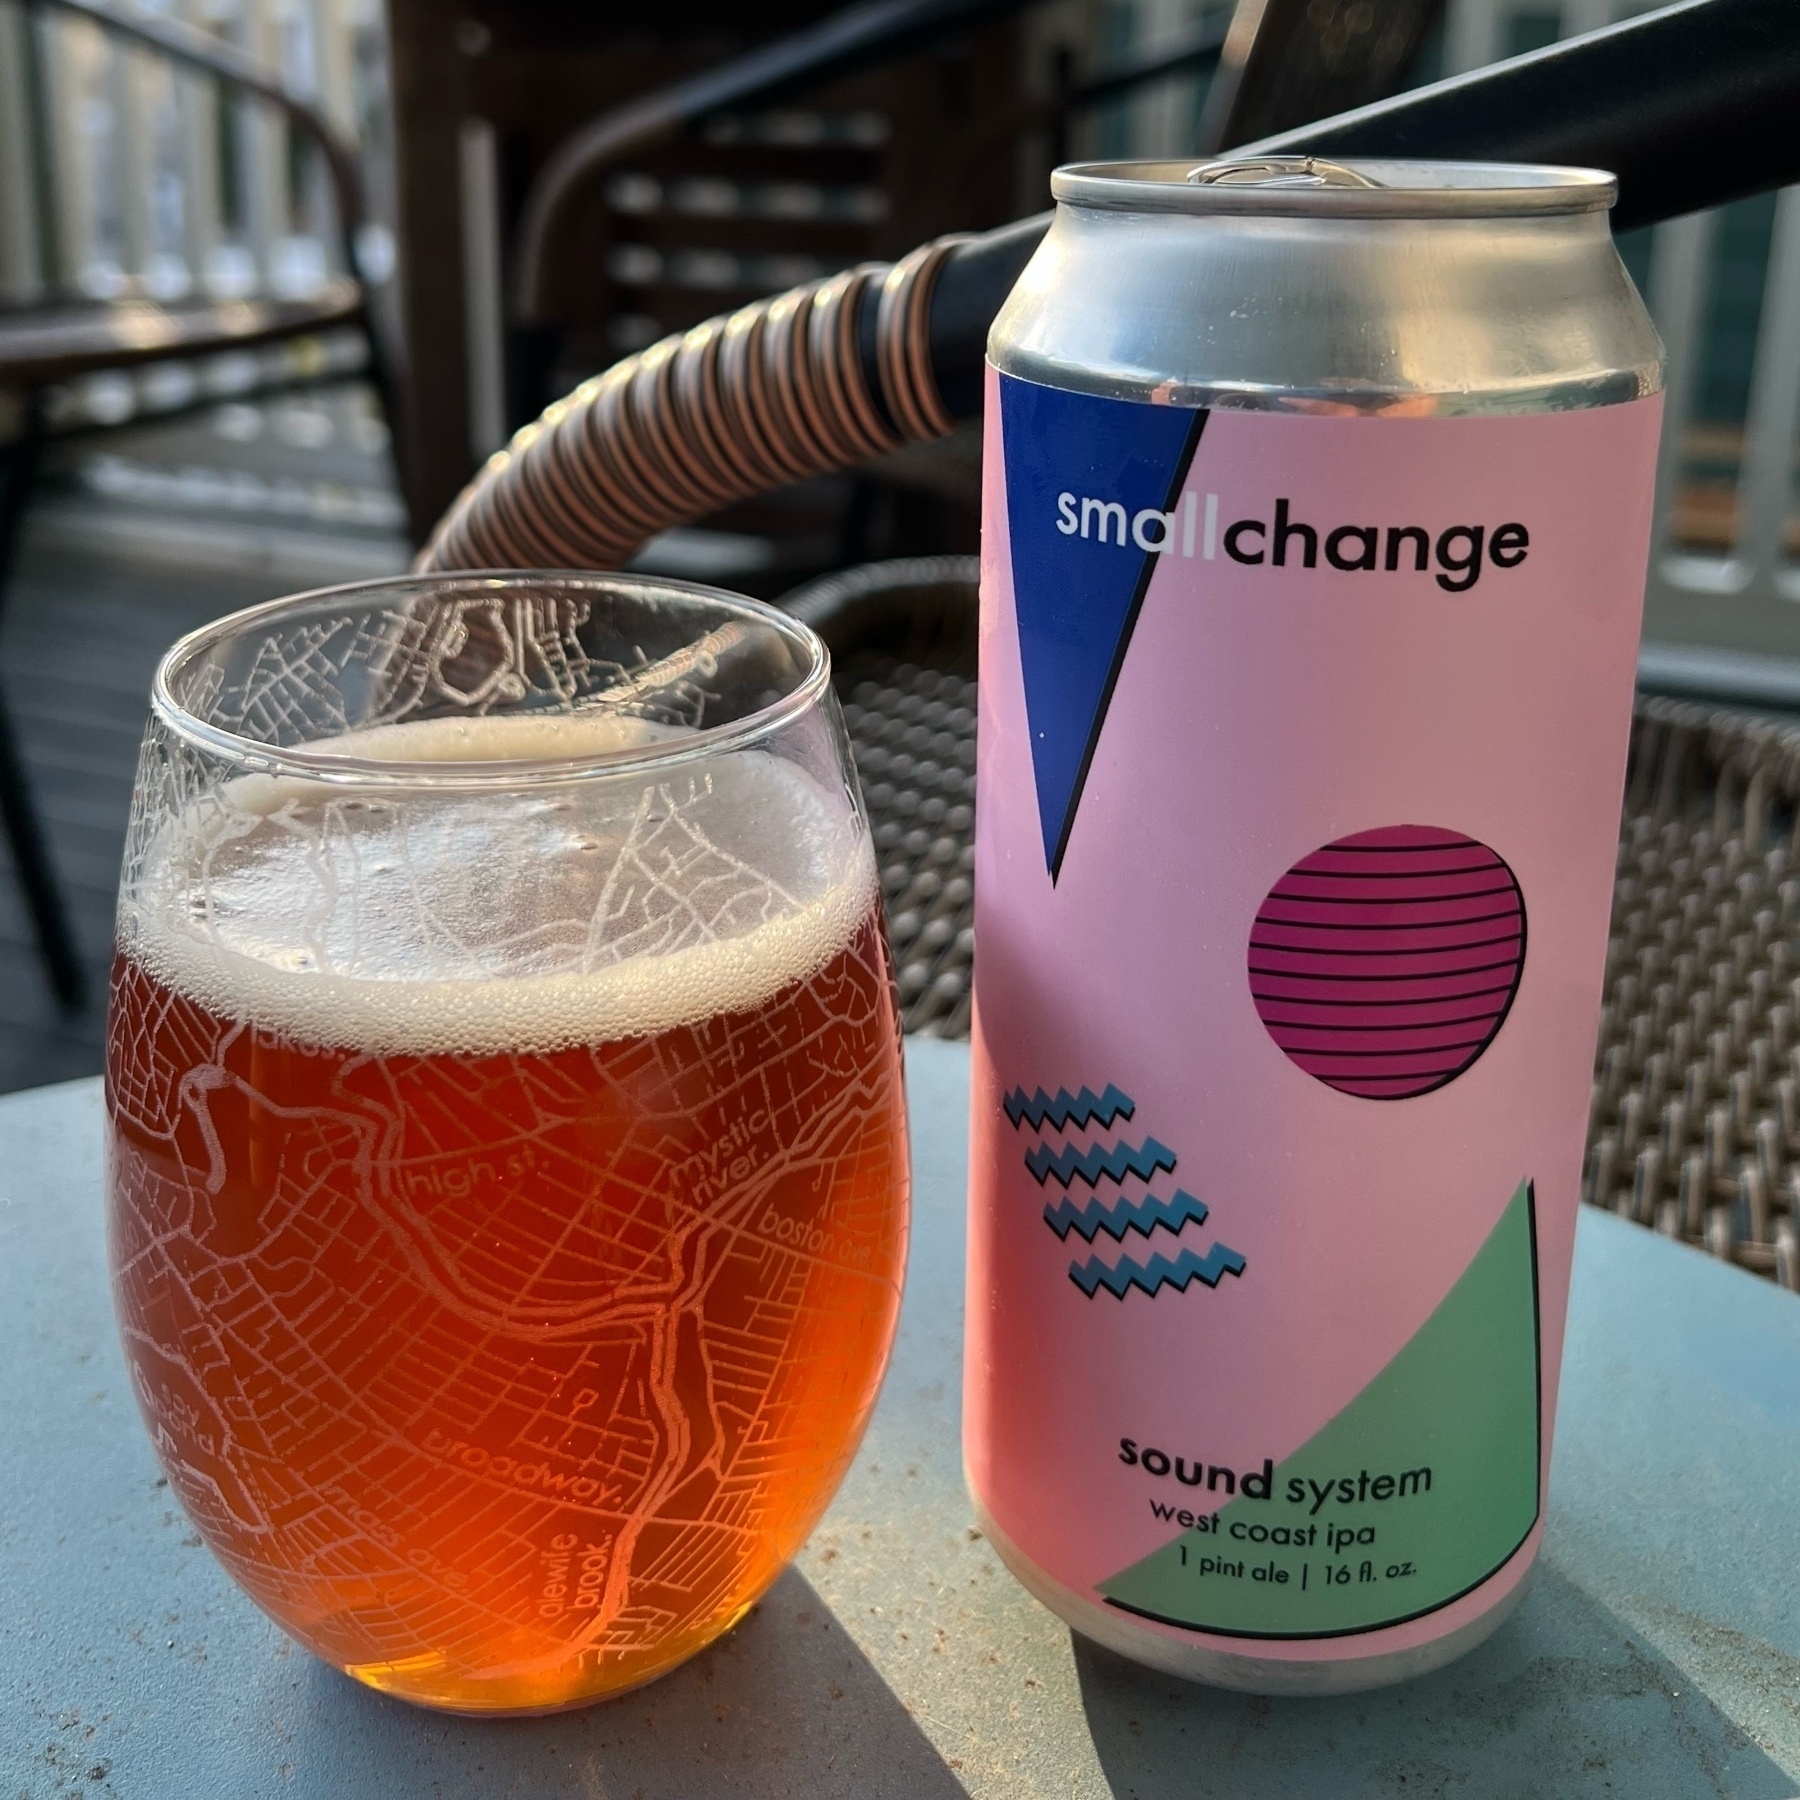 a stemless glass filled with light amber beer, next to a pink beer can labeled "small change - sound system - west coast ipa"